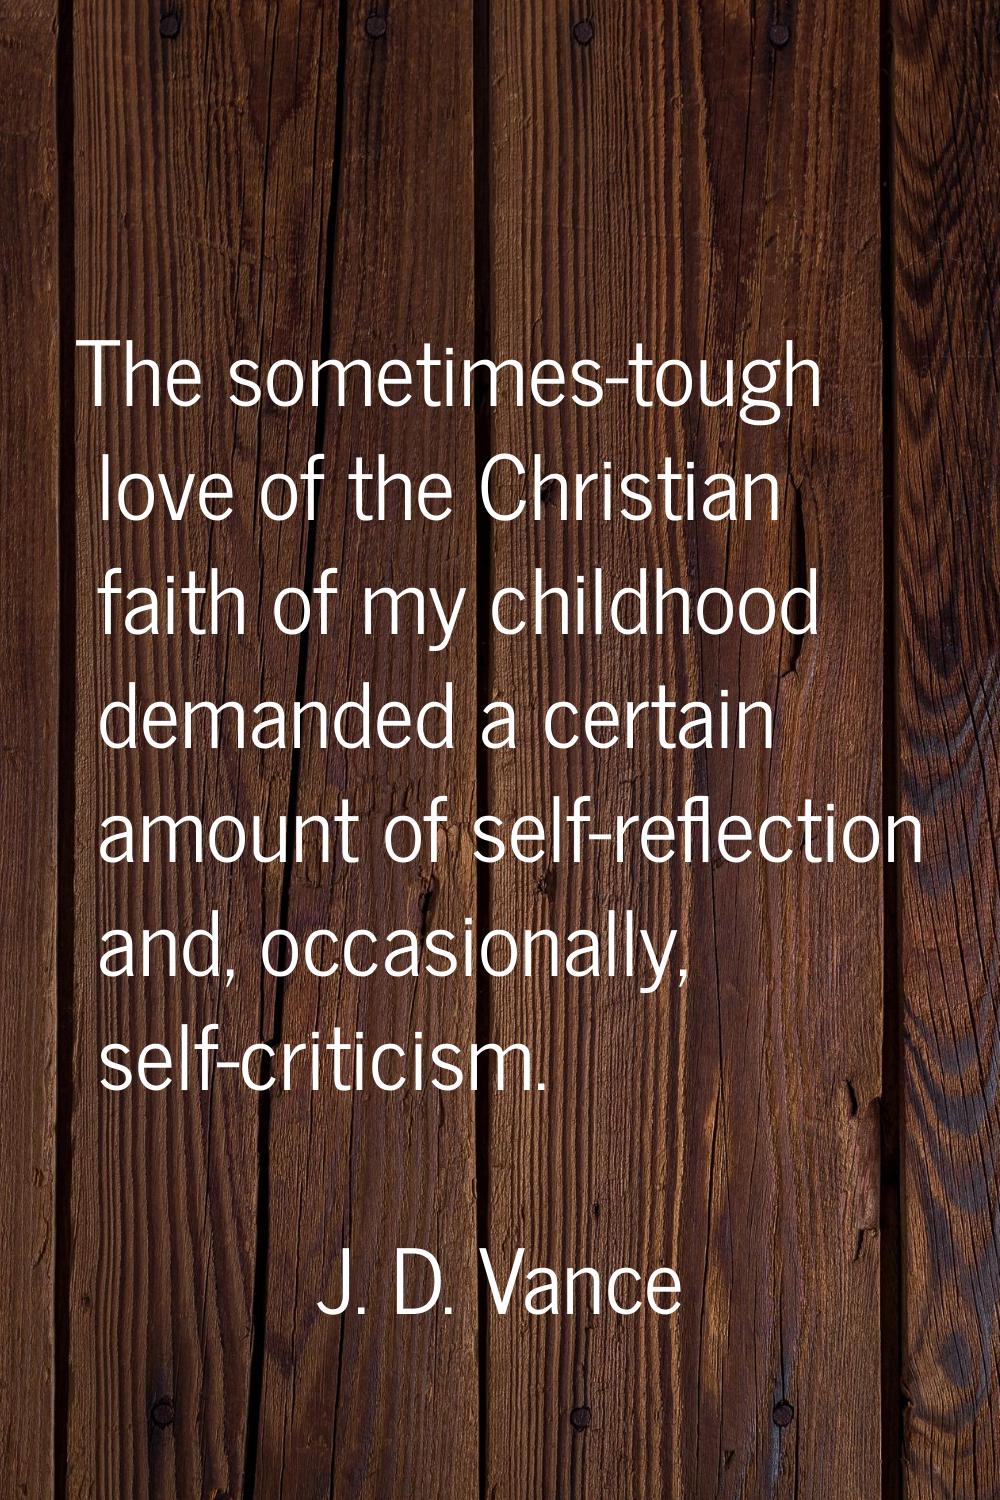 The sometimes-tough love of the Christian faith of my childhood demanded a certain amount of self-r